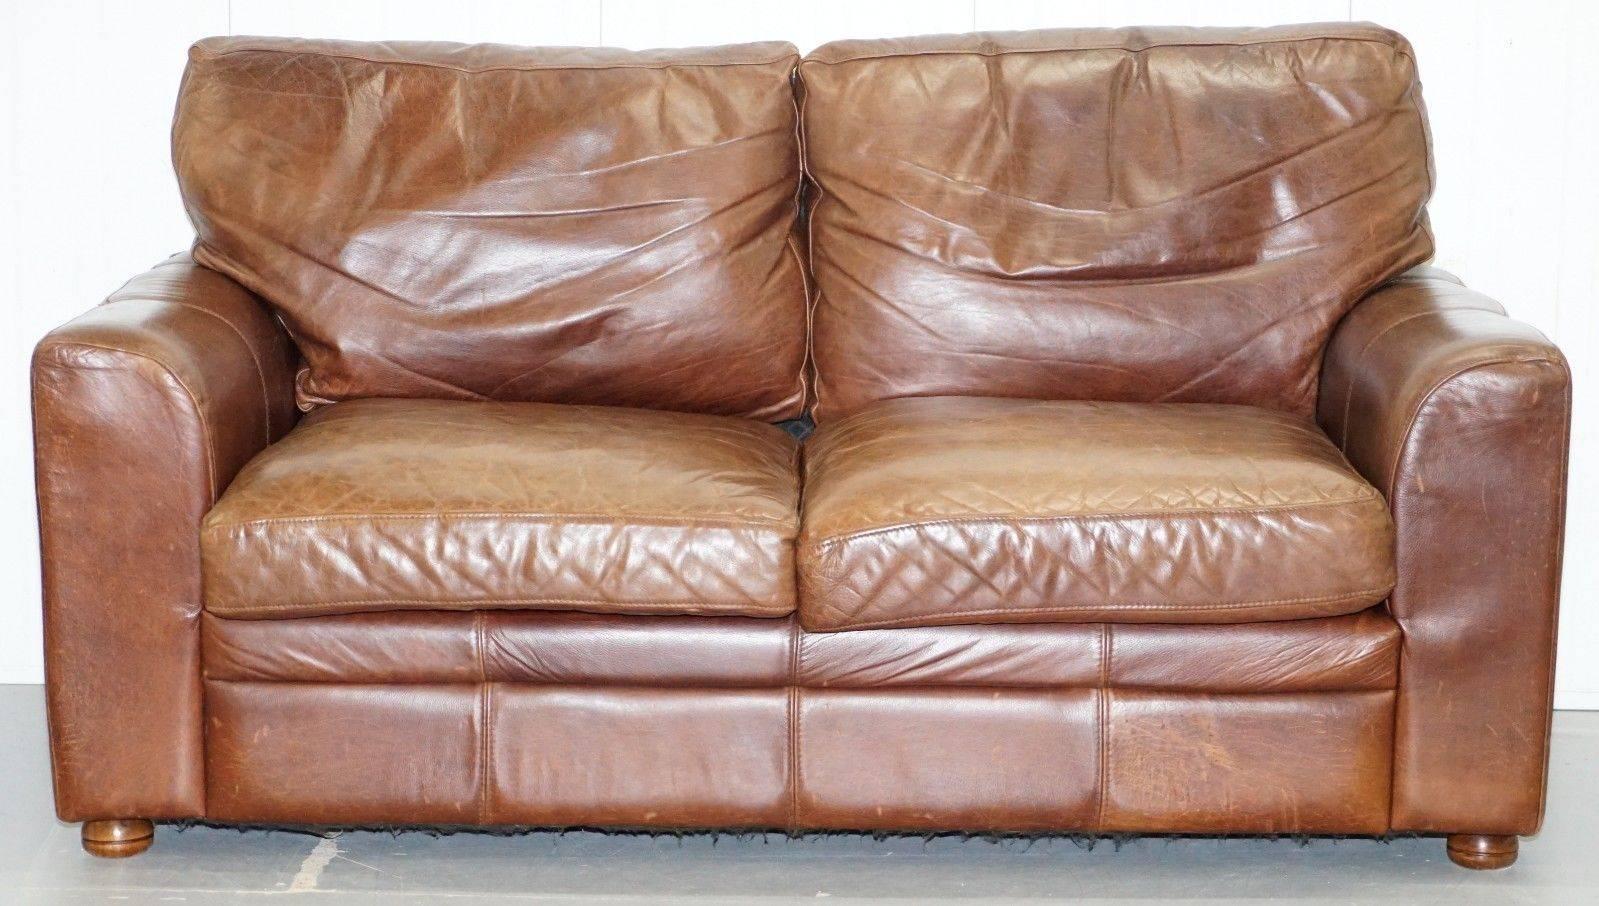 We are delighted to offer for sale this lovely Halo Soho Heritage brown leather sofa RRP £1899

In terms of condition we have deep cleaned hand condition waxed and hand polished it from top to bottom, the leather is designed to mark and wear